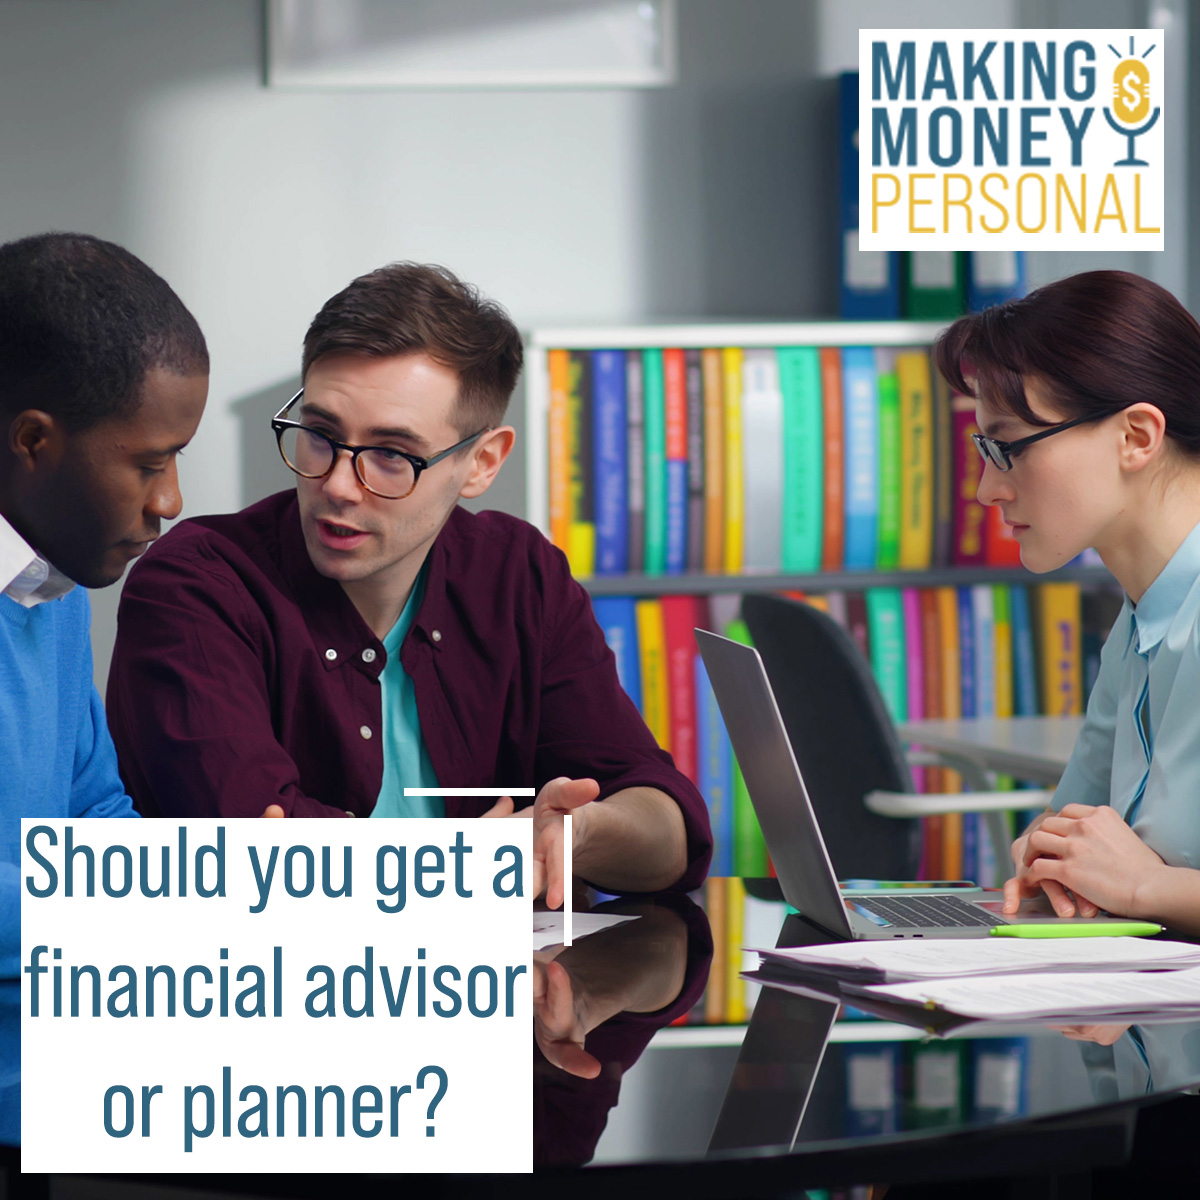 Listen now to learn the differences between a #financialadvisor and a #financialplanner! trianglecu.podbean.com/e/the-big-diff…